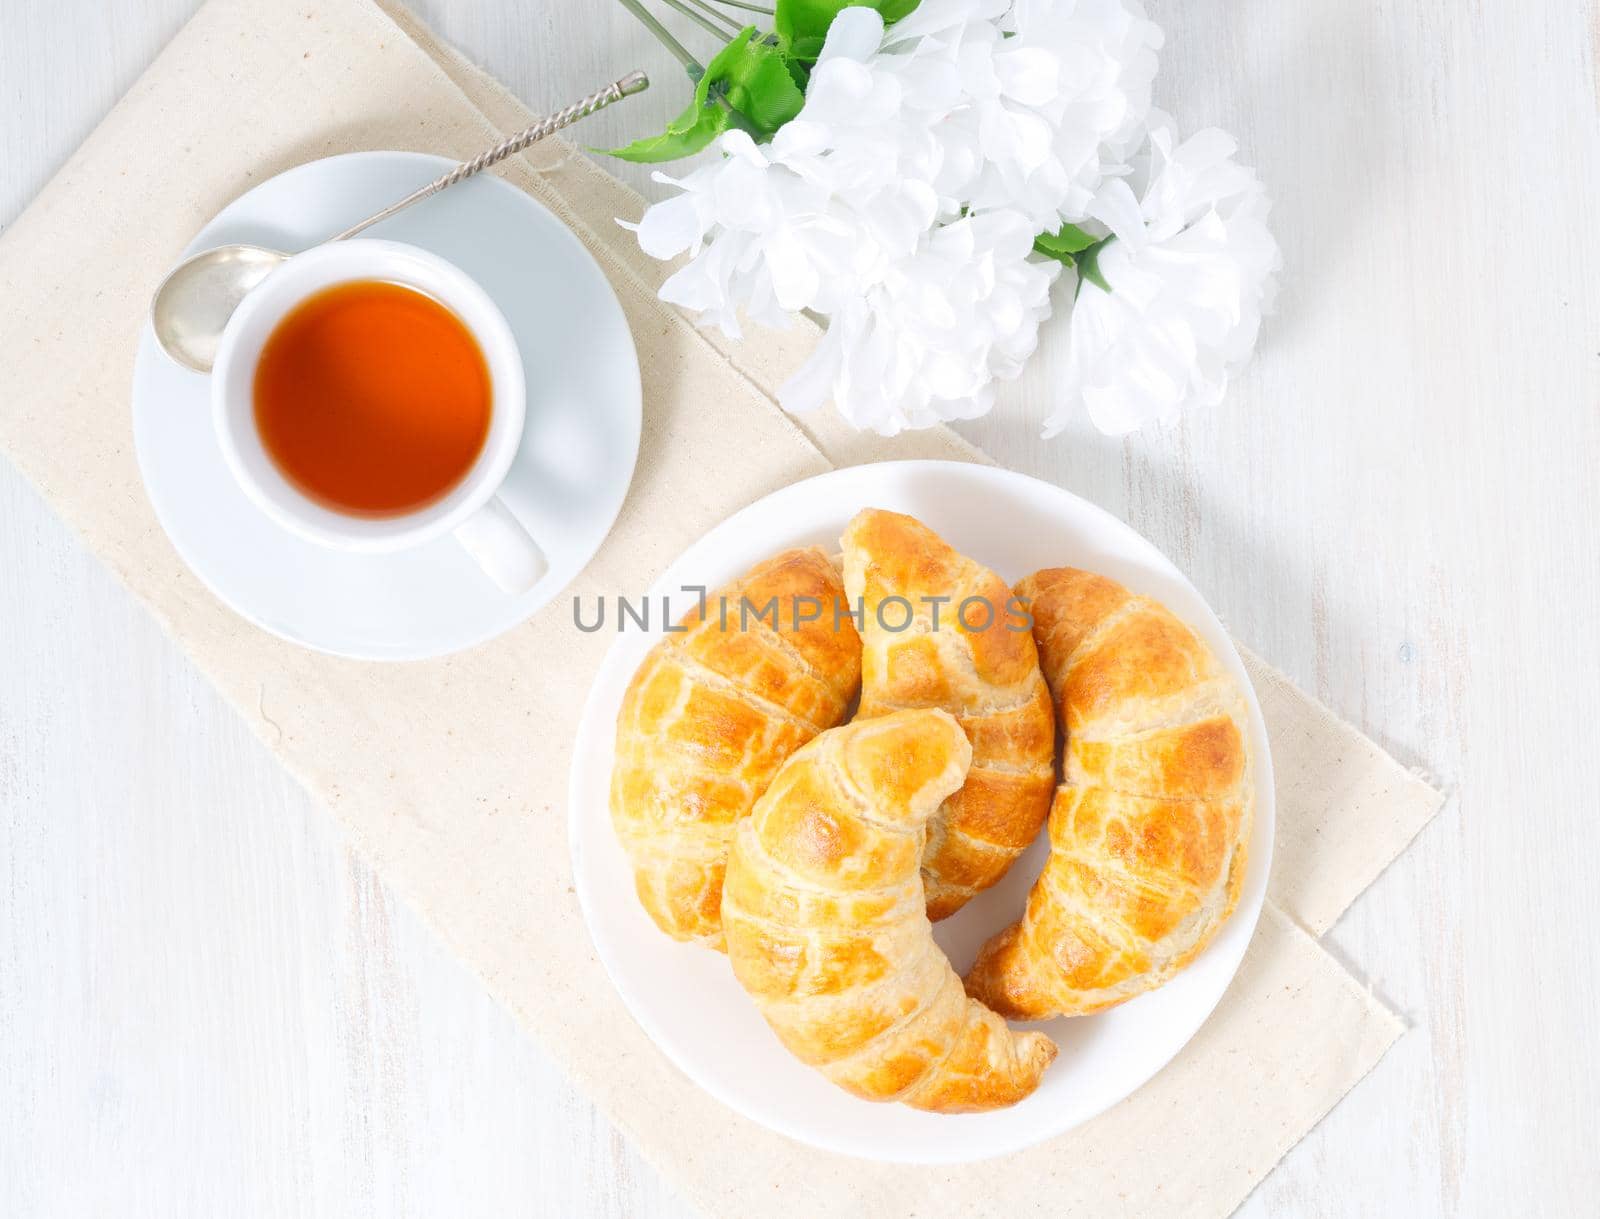 Cup of tea, flowers and a fresh baked puff pastry on a white table. Delicious croissants, top view